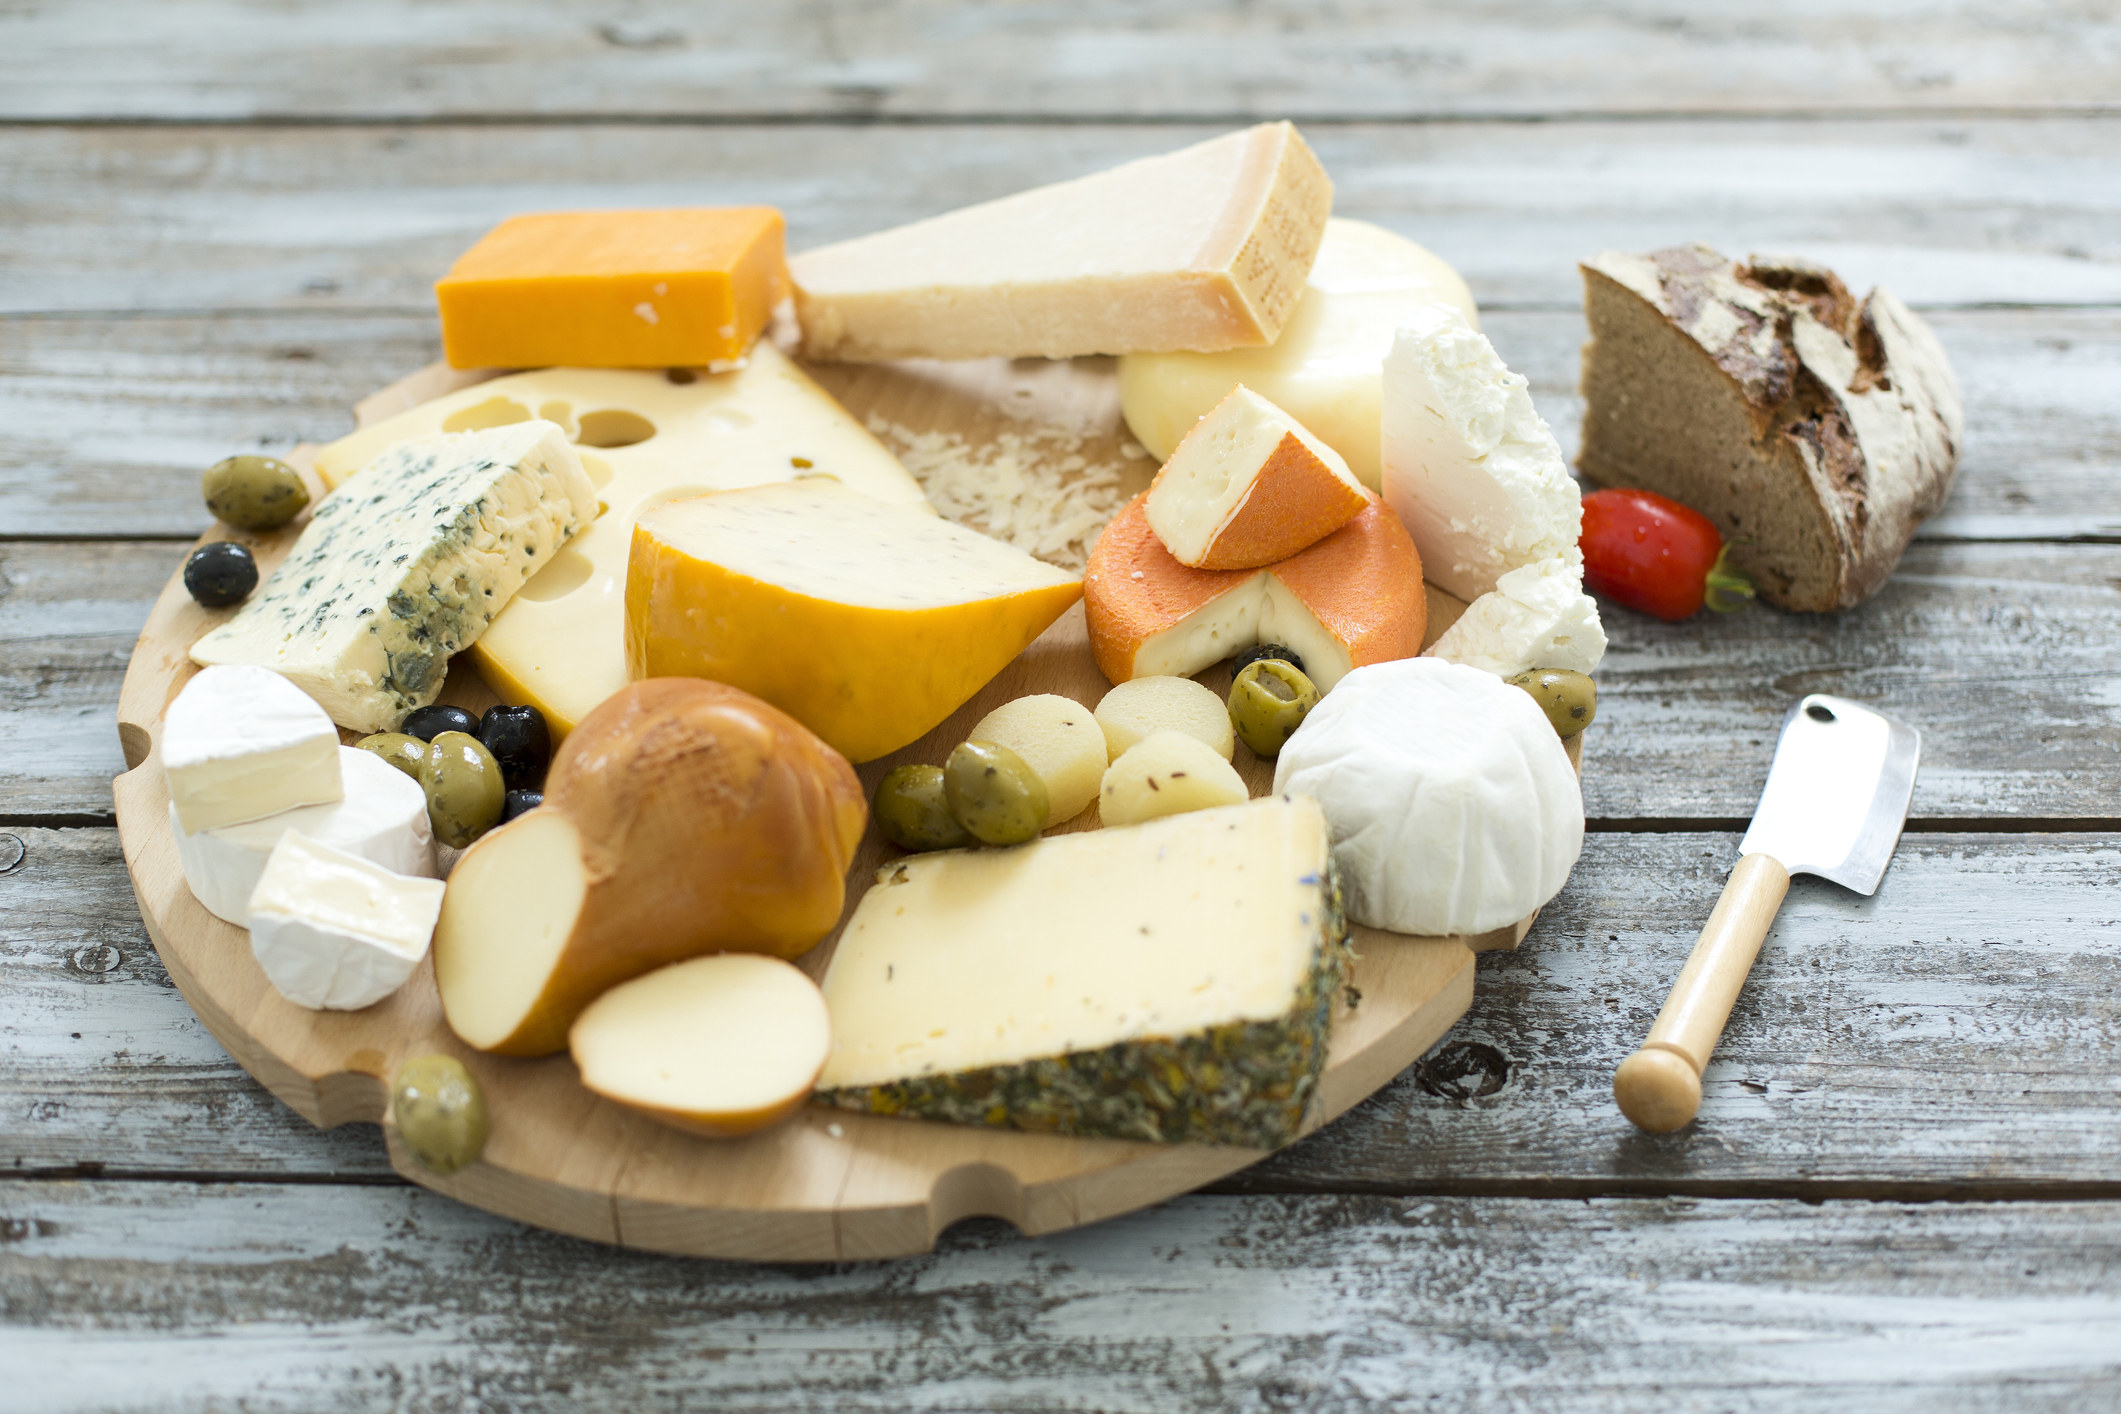 A wooden plate of various cheeses